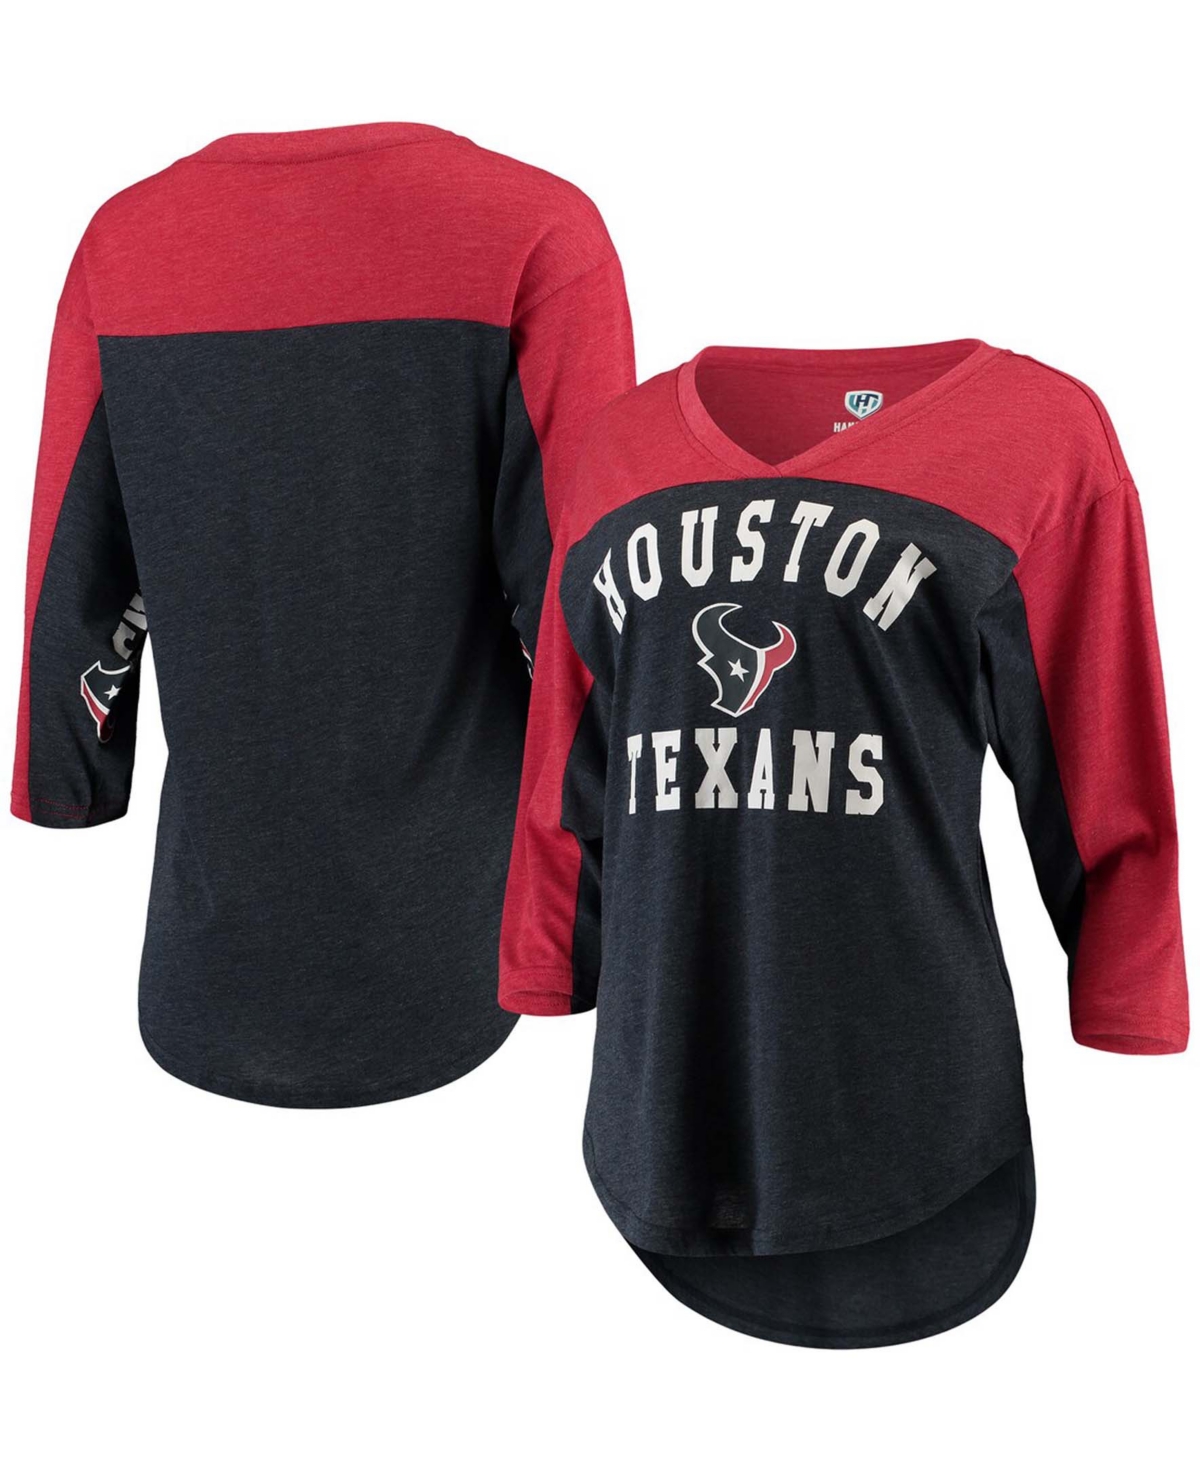 Hands High Women's Navy, Red Houston Texans In The Zone 3/4 Sleeve V-Neck T-shirt